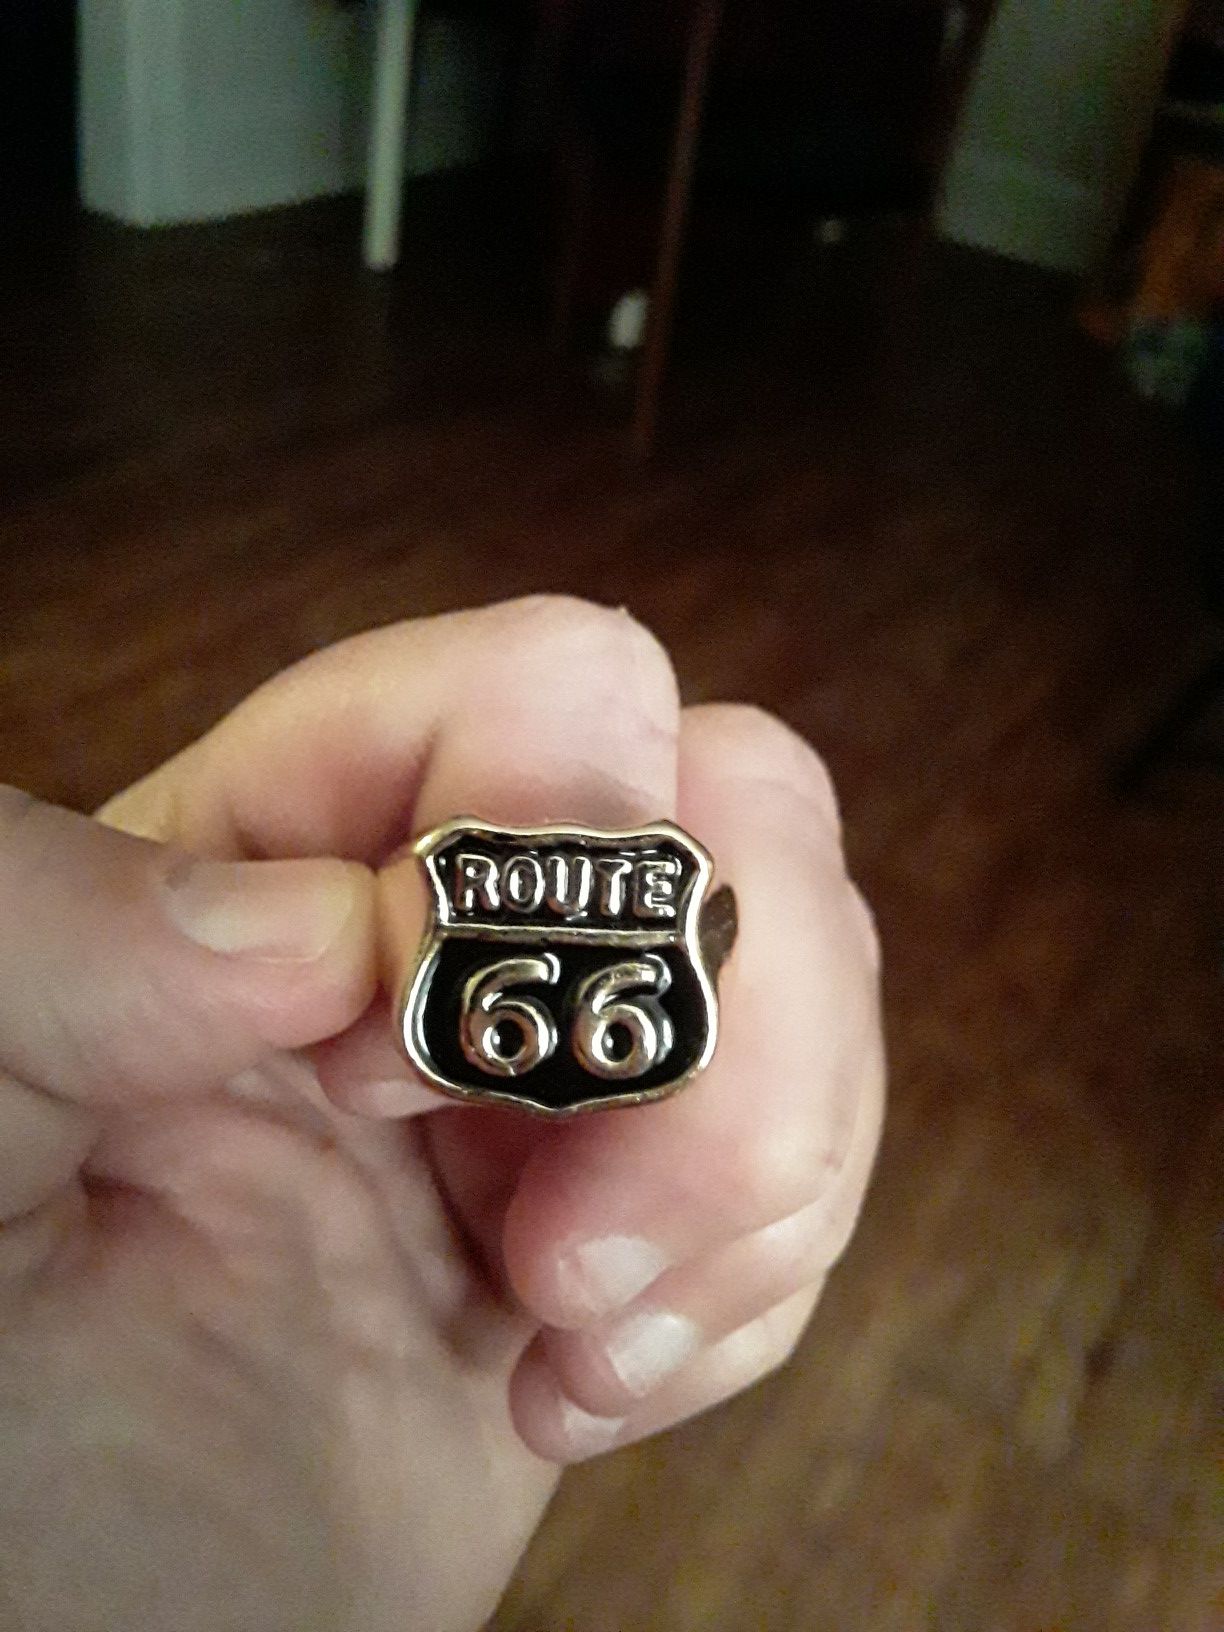 Route 66 Stainless Steel Men's Ring - Size 9